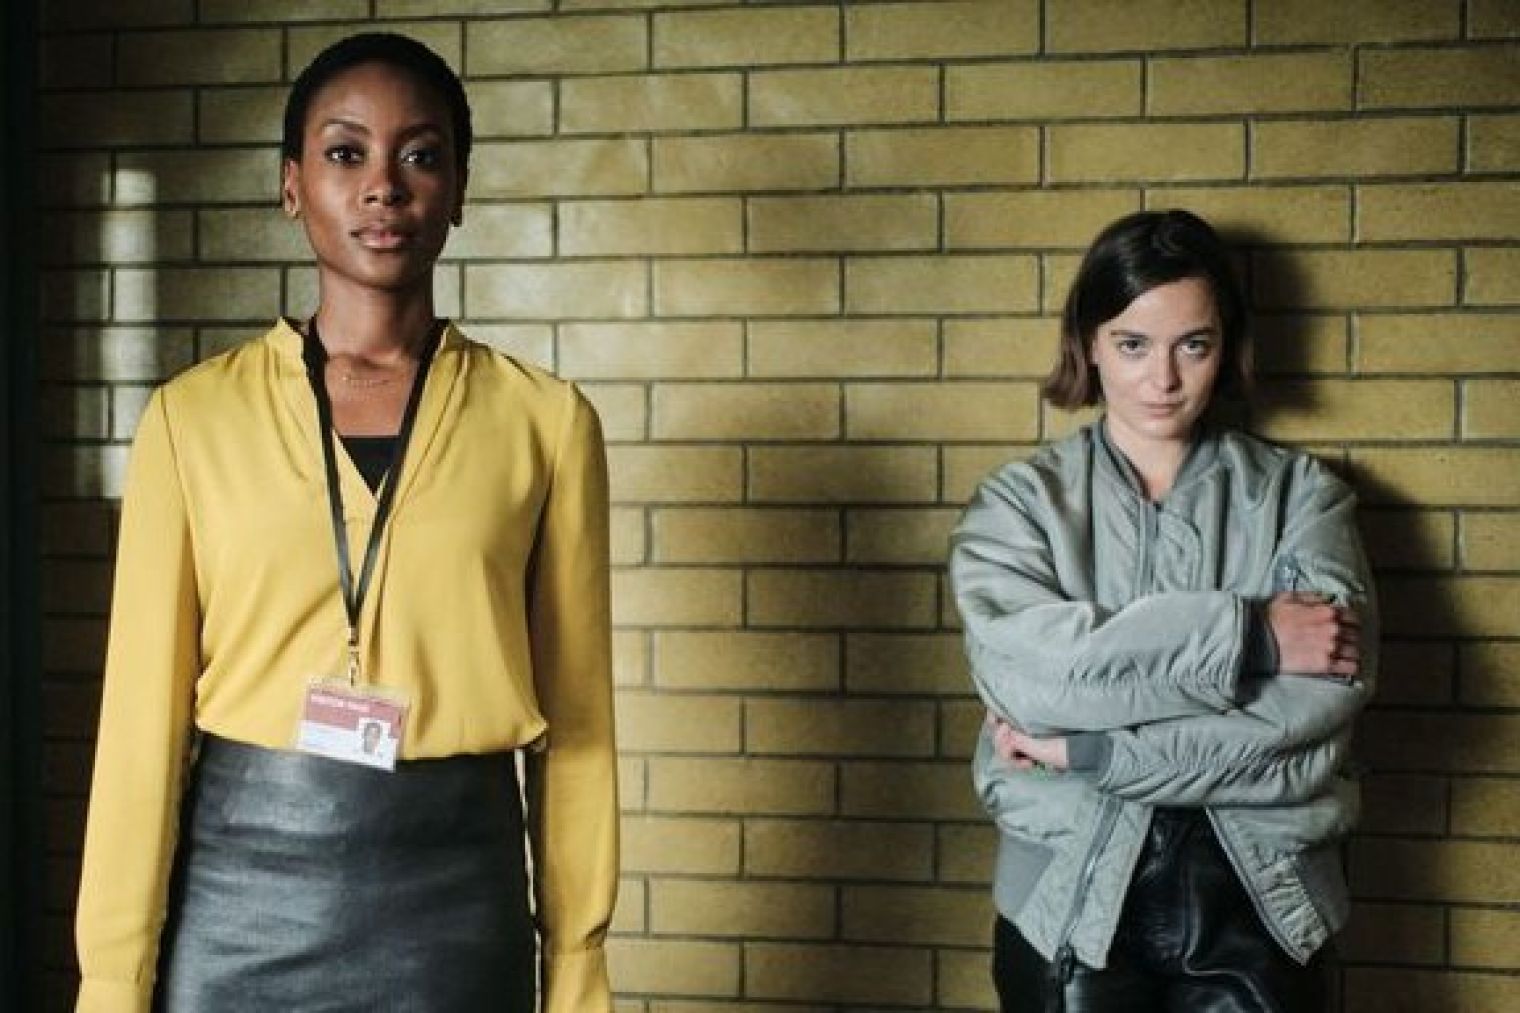 Celine Buckens to play the lead in new BBC drama 'Showtrial', from World Productions, the team behind 'Bodyguard', 'Line of Duty' and 'Vigil'. 